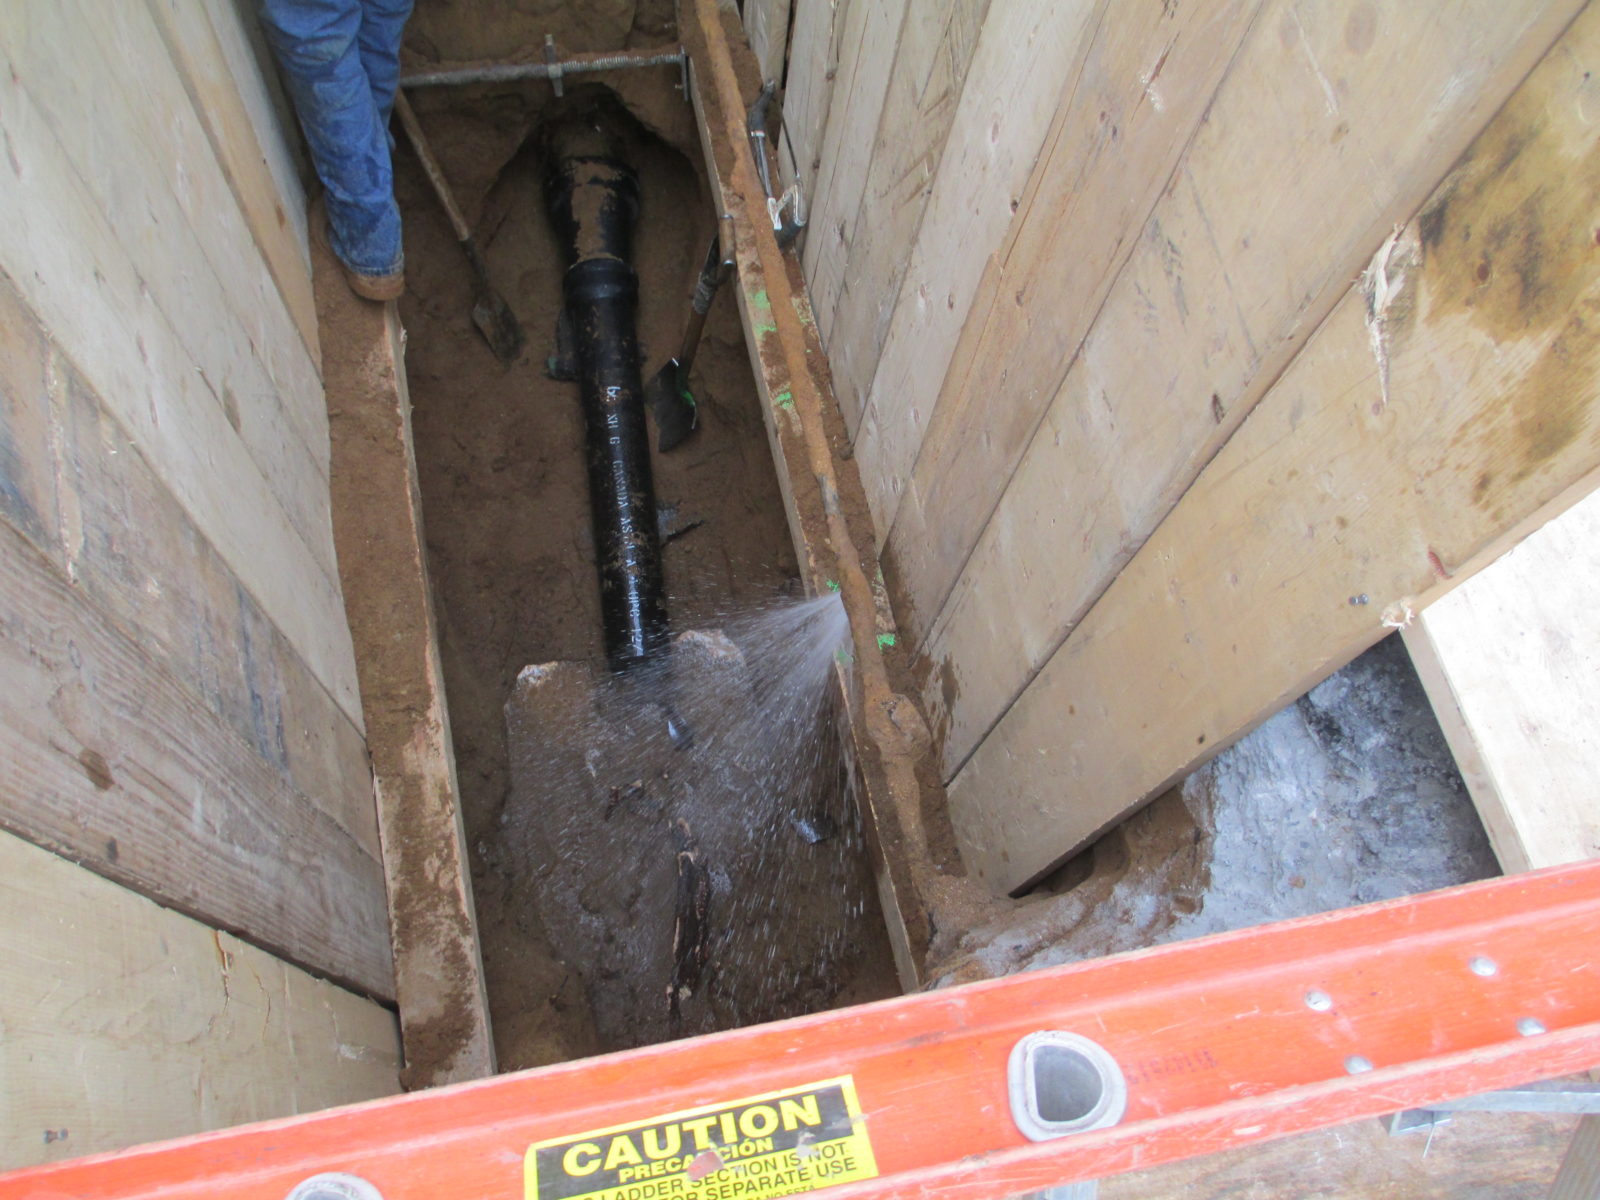 New sewer pipe and leaking water line